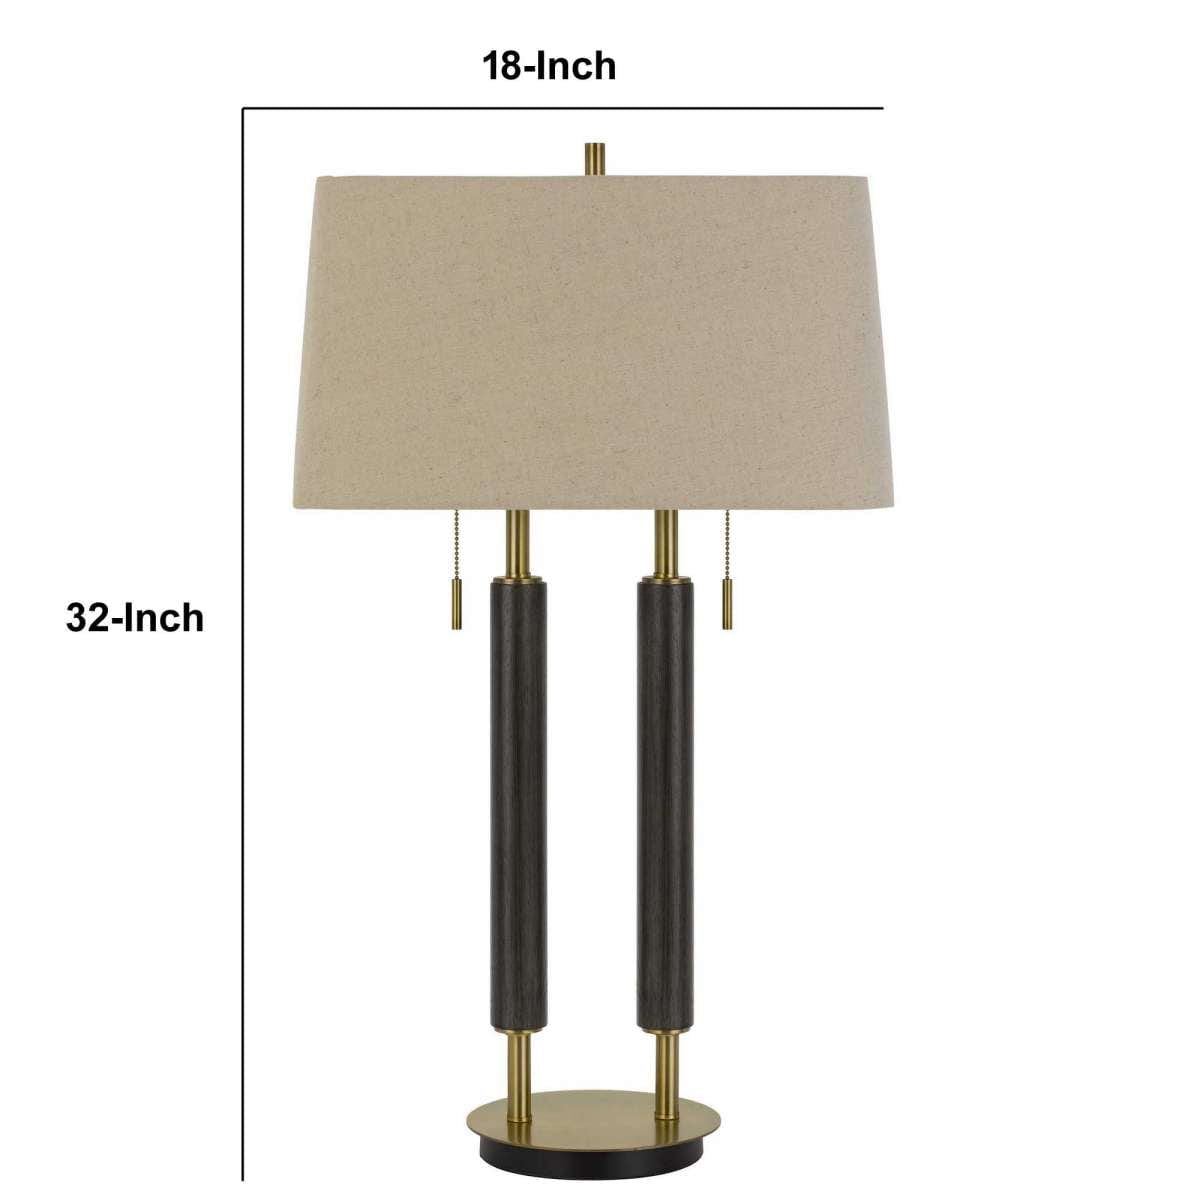 Benzara 32" Metal And Wood Desk Lamp With Two Light Setup, Brown And Gold By Benzara Table Lamps BM233475